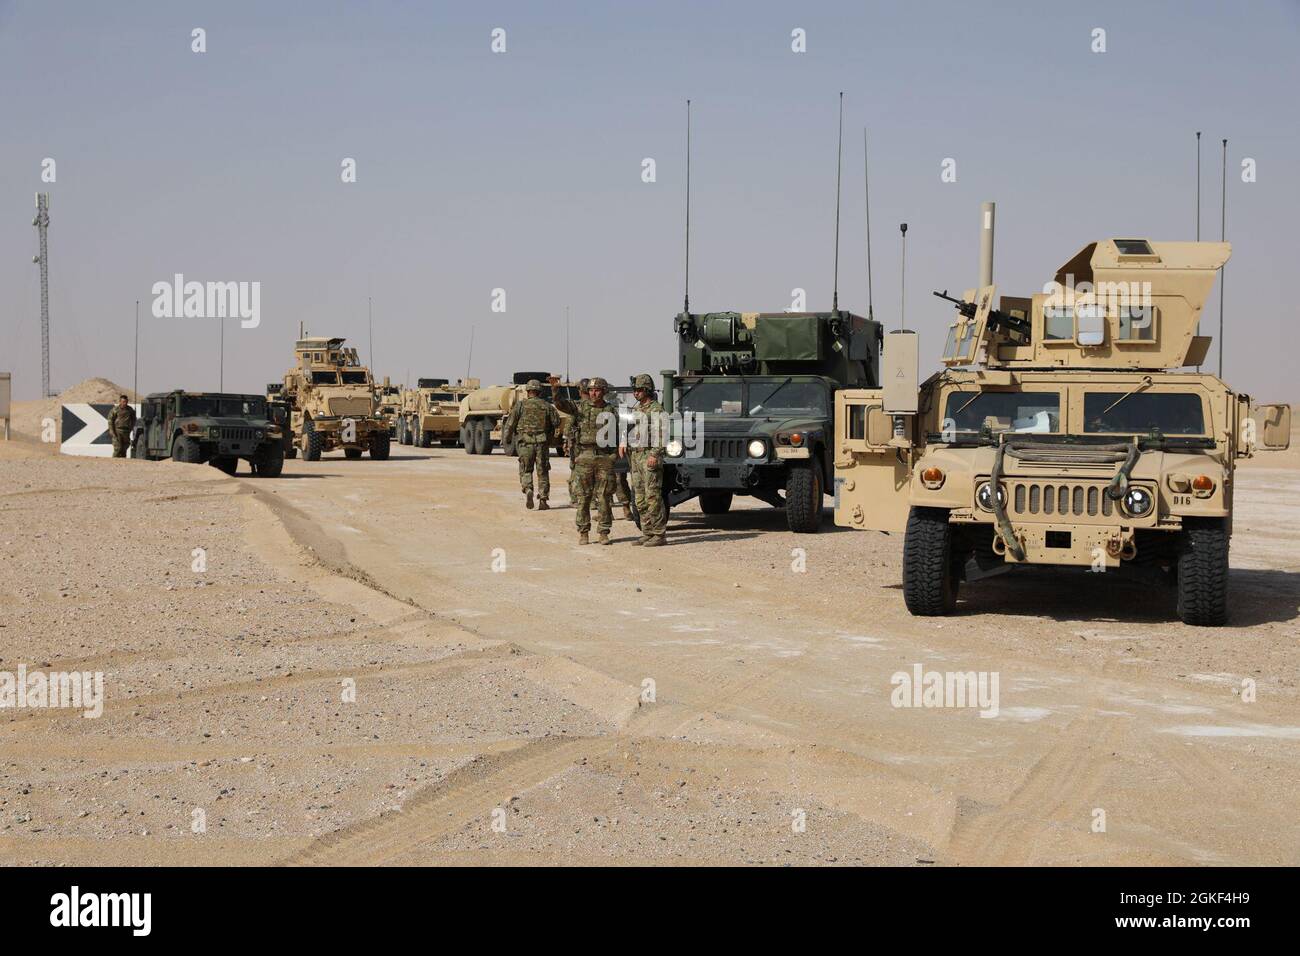 U.S. Army Task Force Iron Valor vehicles are waiting to conduct field operations during a validation exercise at Udairi Range Complex, Kuwait, on April 22, 2021. Soldiers from the 1-181 Field Artillery Regiment and Delta Company 3-172 Infantry-Mountain, make up Task Force Iron Valor. Stock Photo